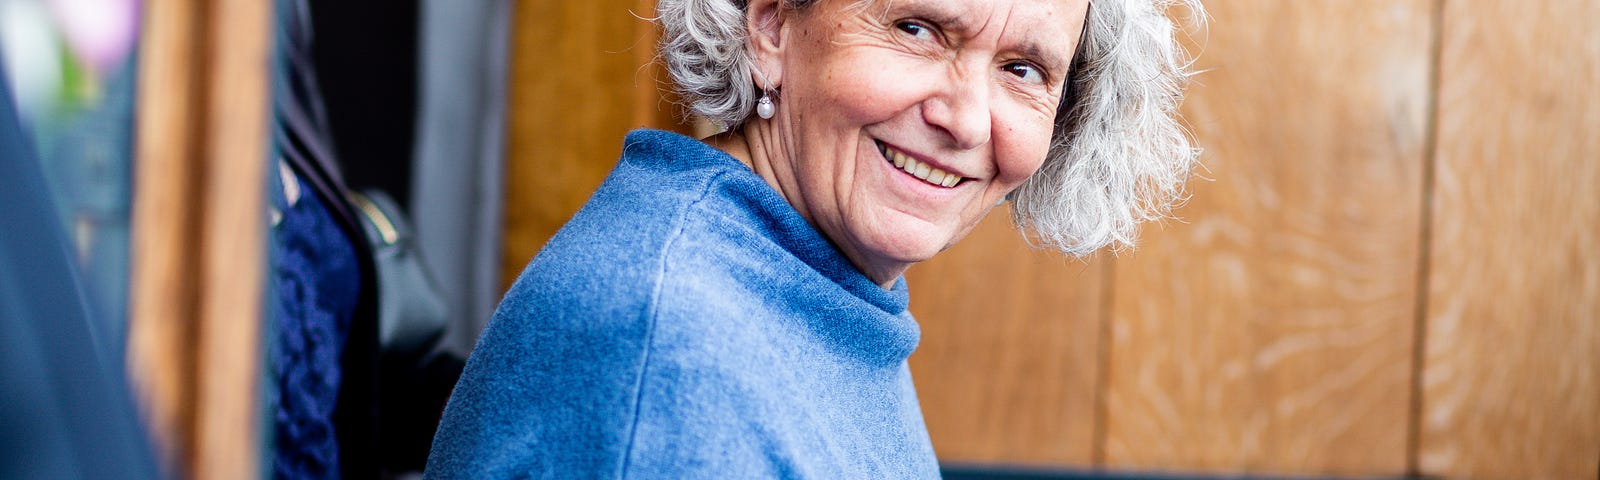 Beautiful gray haired older woman smiling at two men as she opens her door.